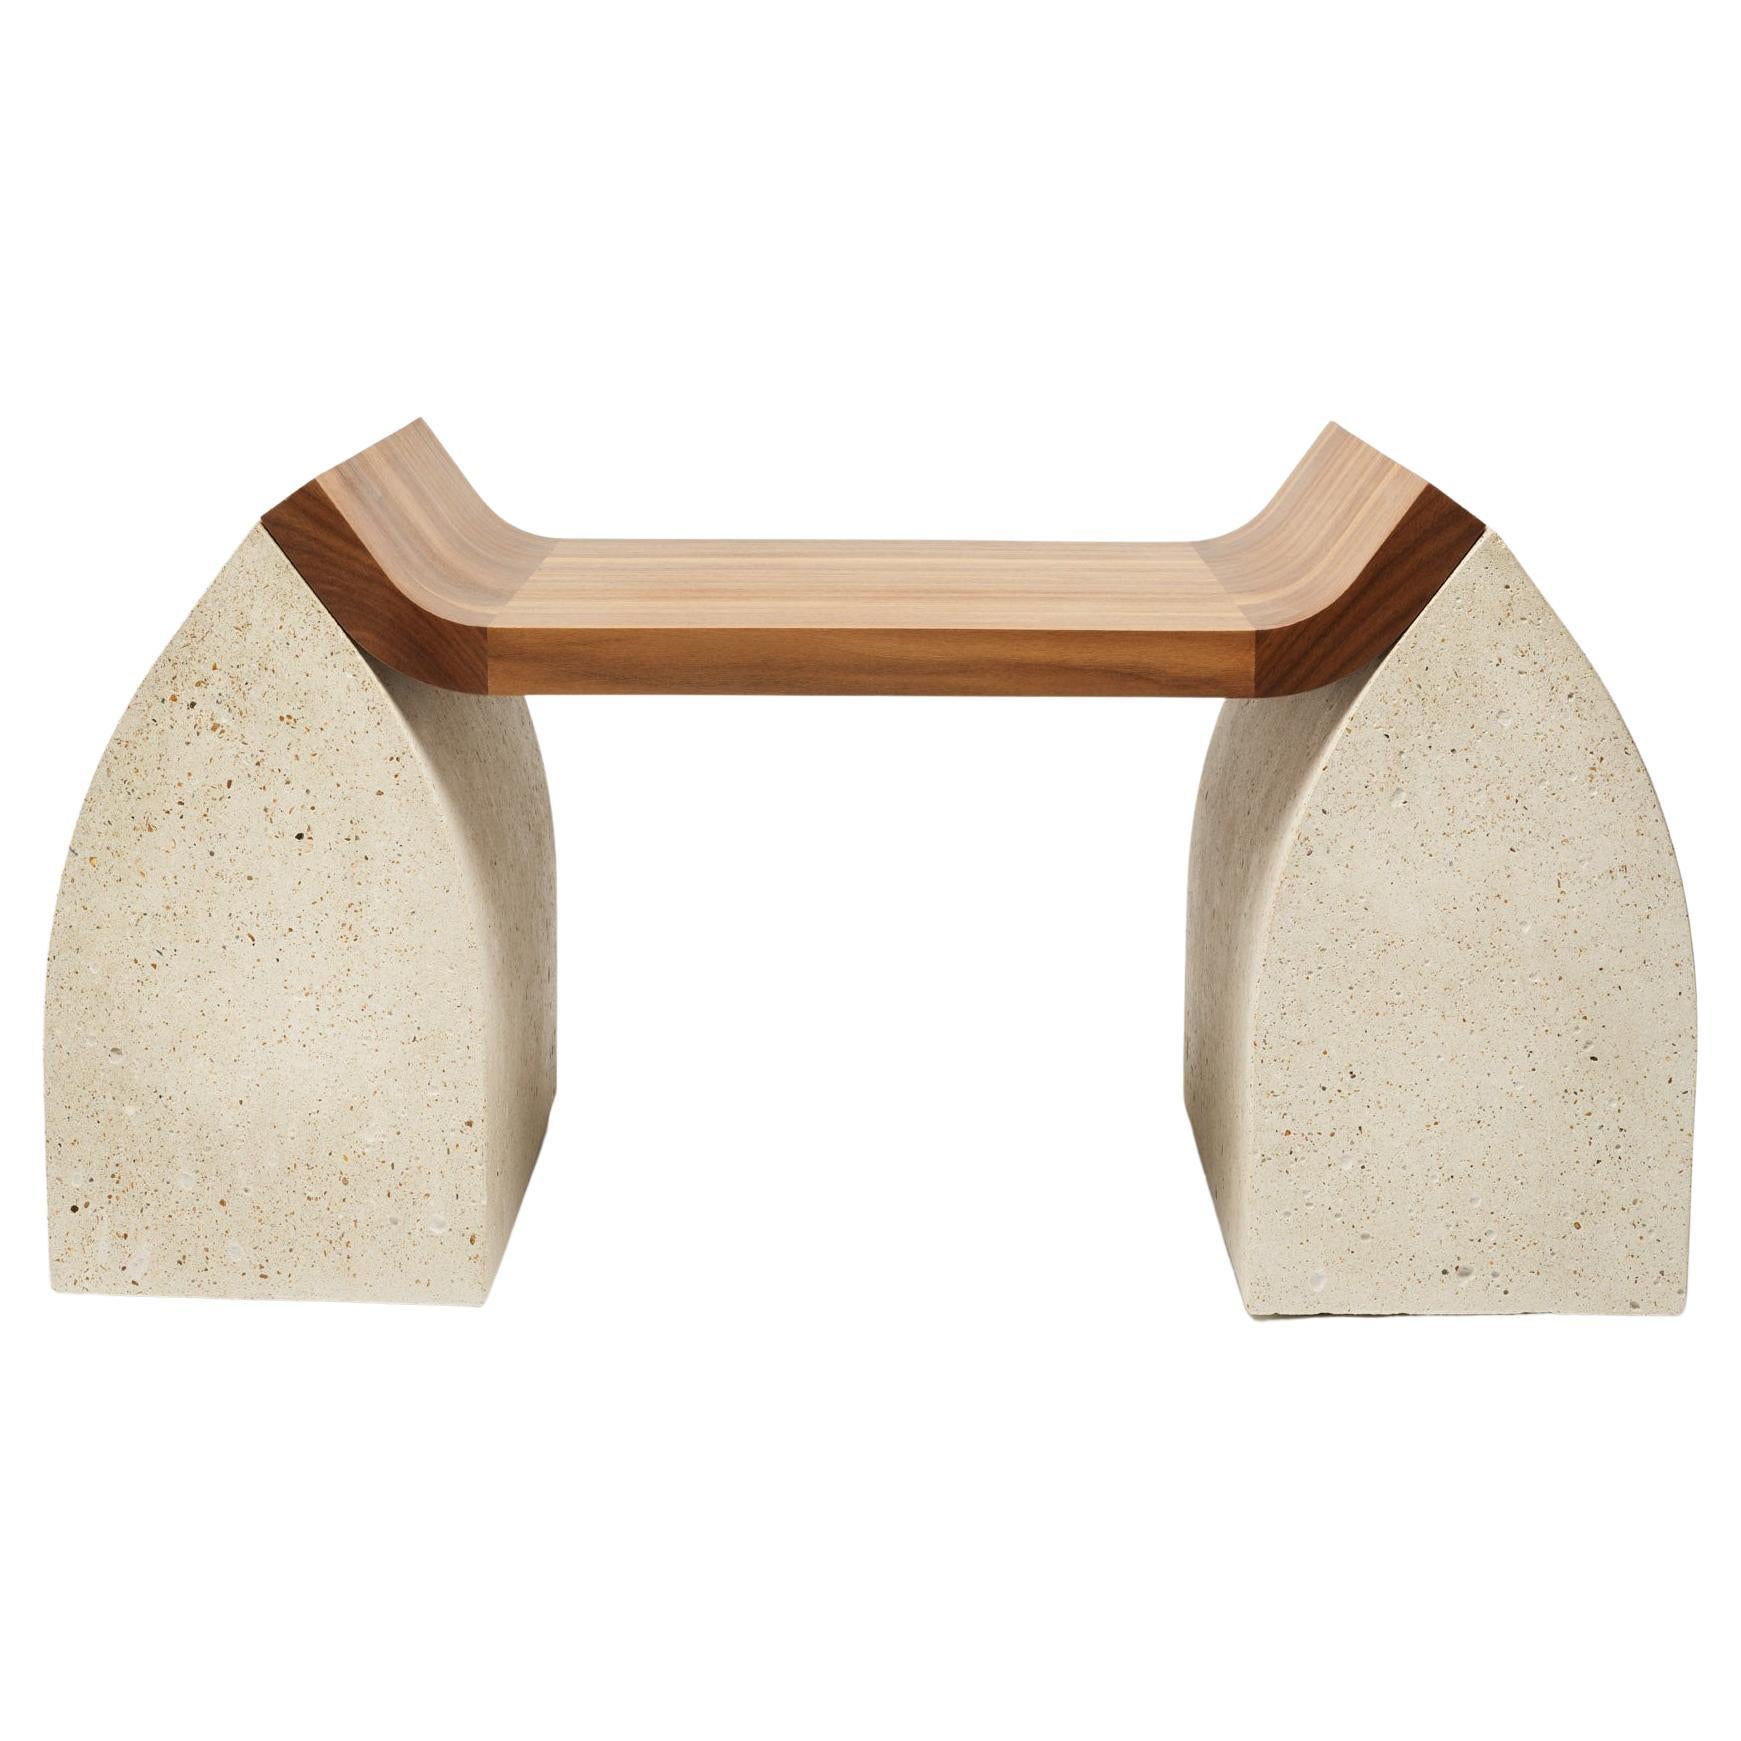 American Walnut, Granito Stone Traaf Bench Small by Tim Vranken For Sale